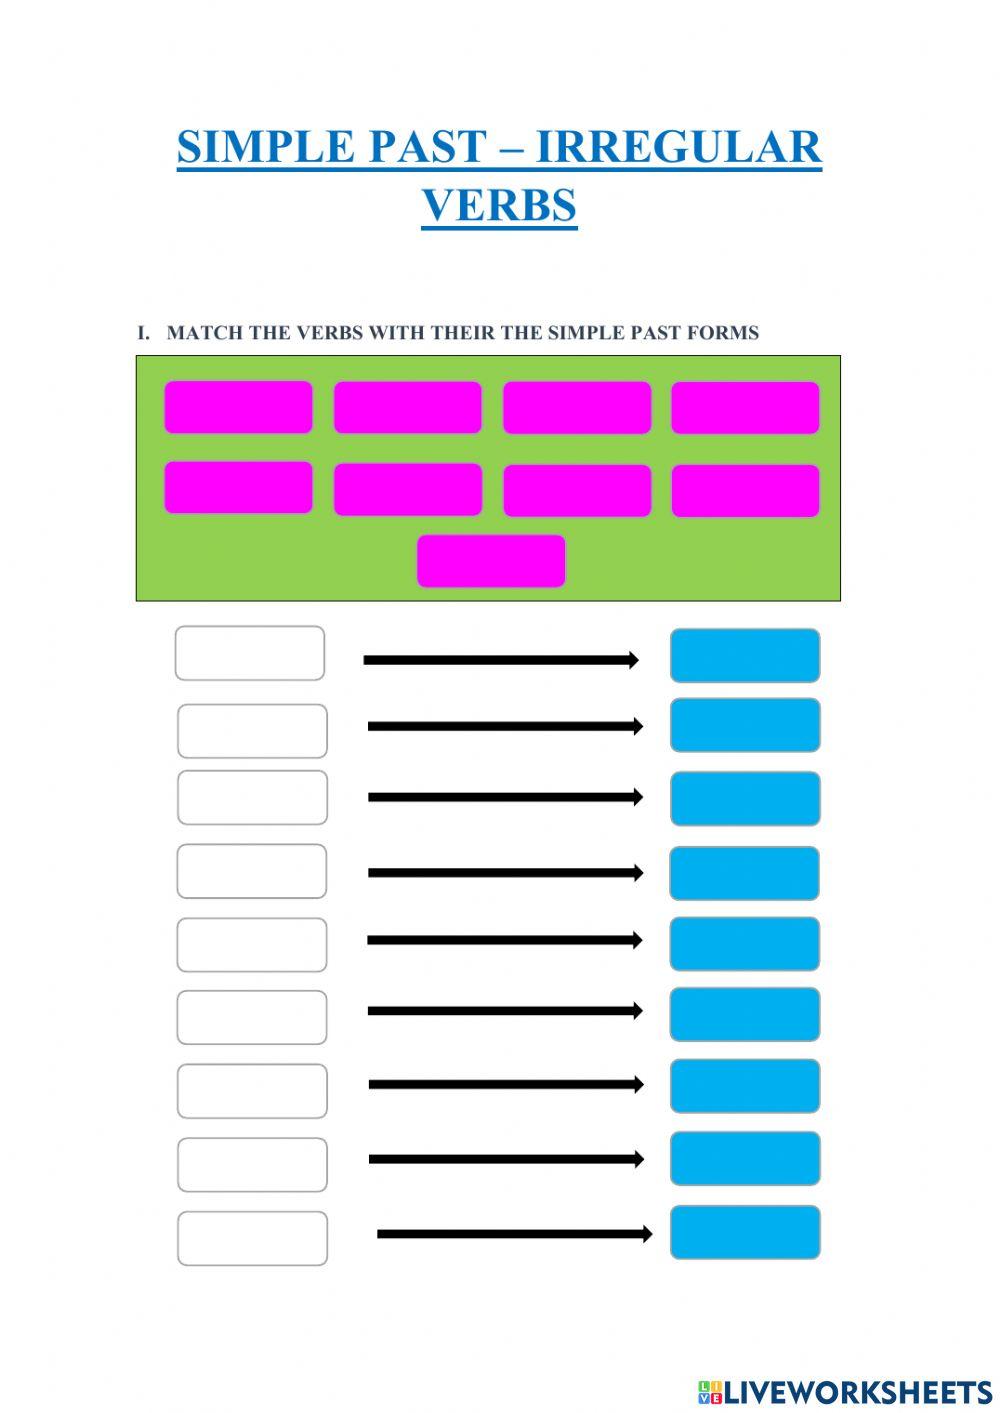 Match the verbs with their the simple past forms